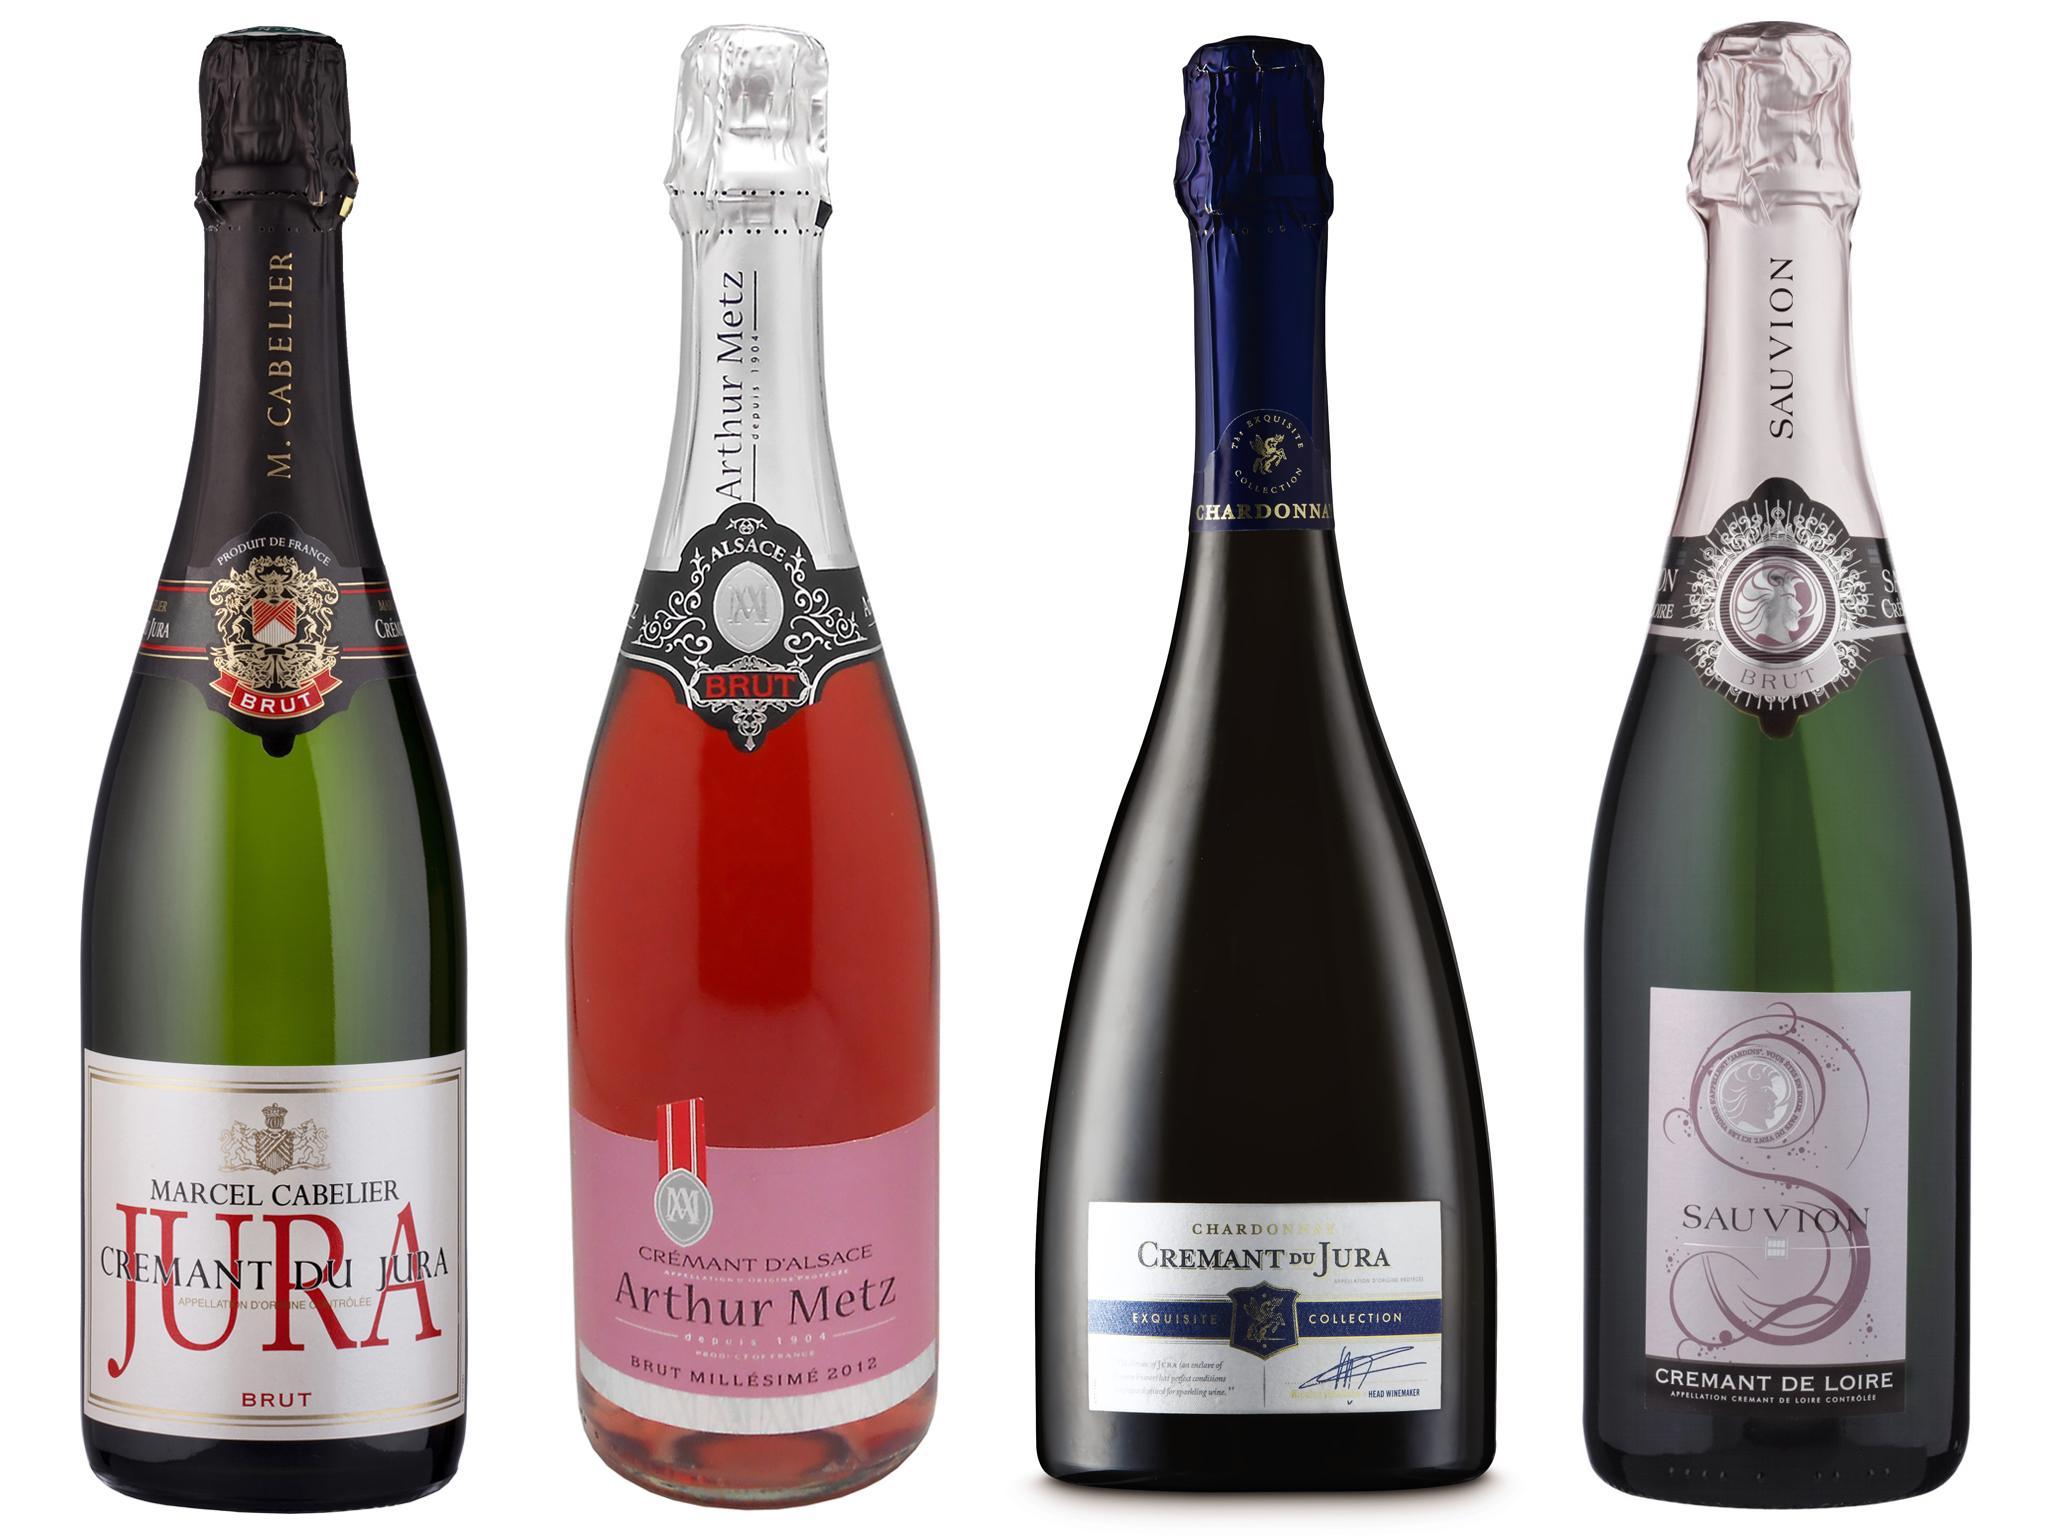 A touch of class: with each variety bringing a taste of its region’s terroir, the French fizz may be seen as a little more refined than its Italian cousin